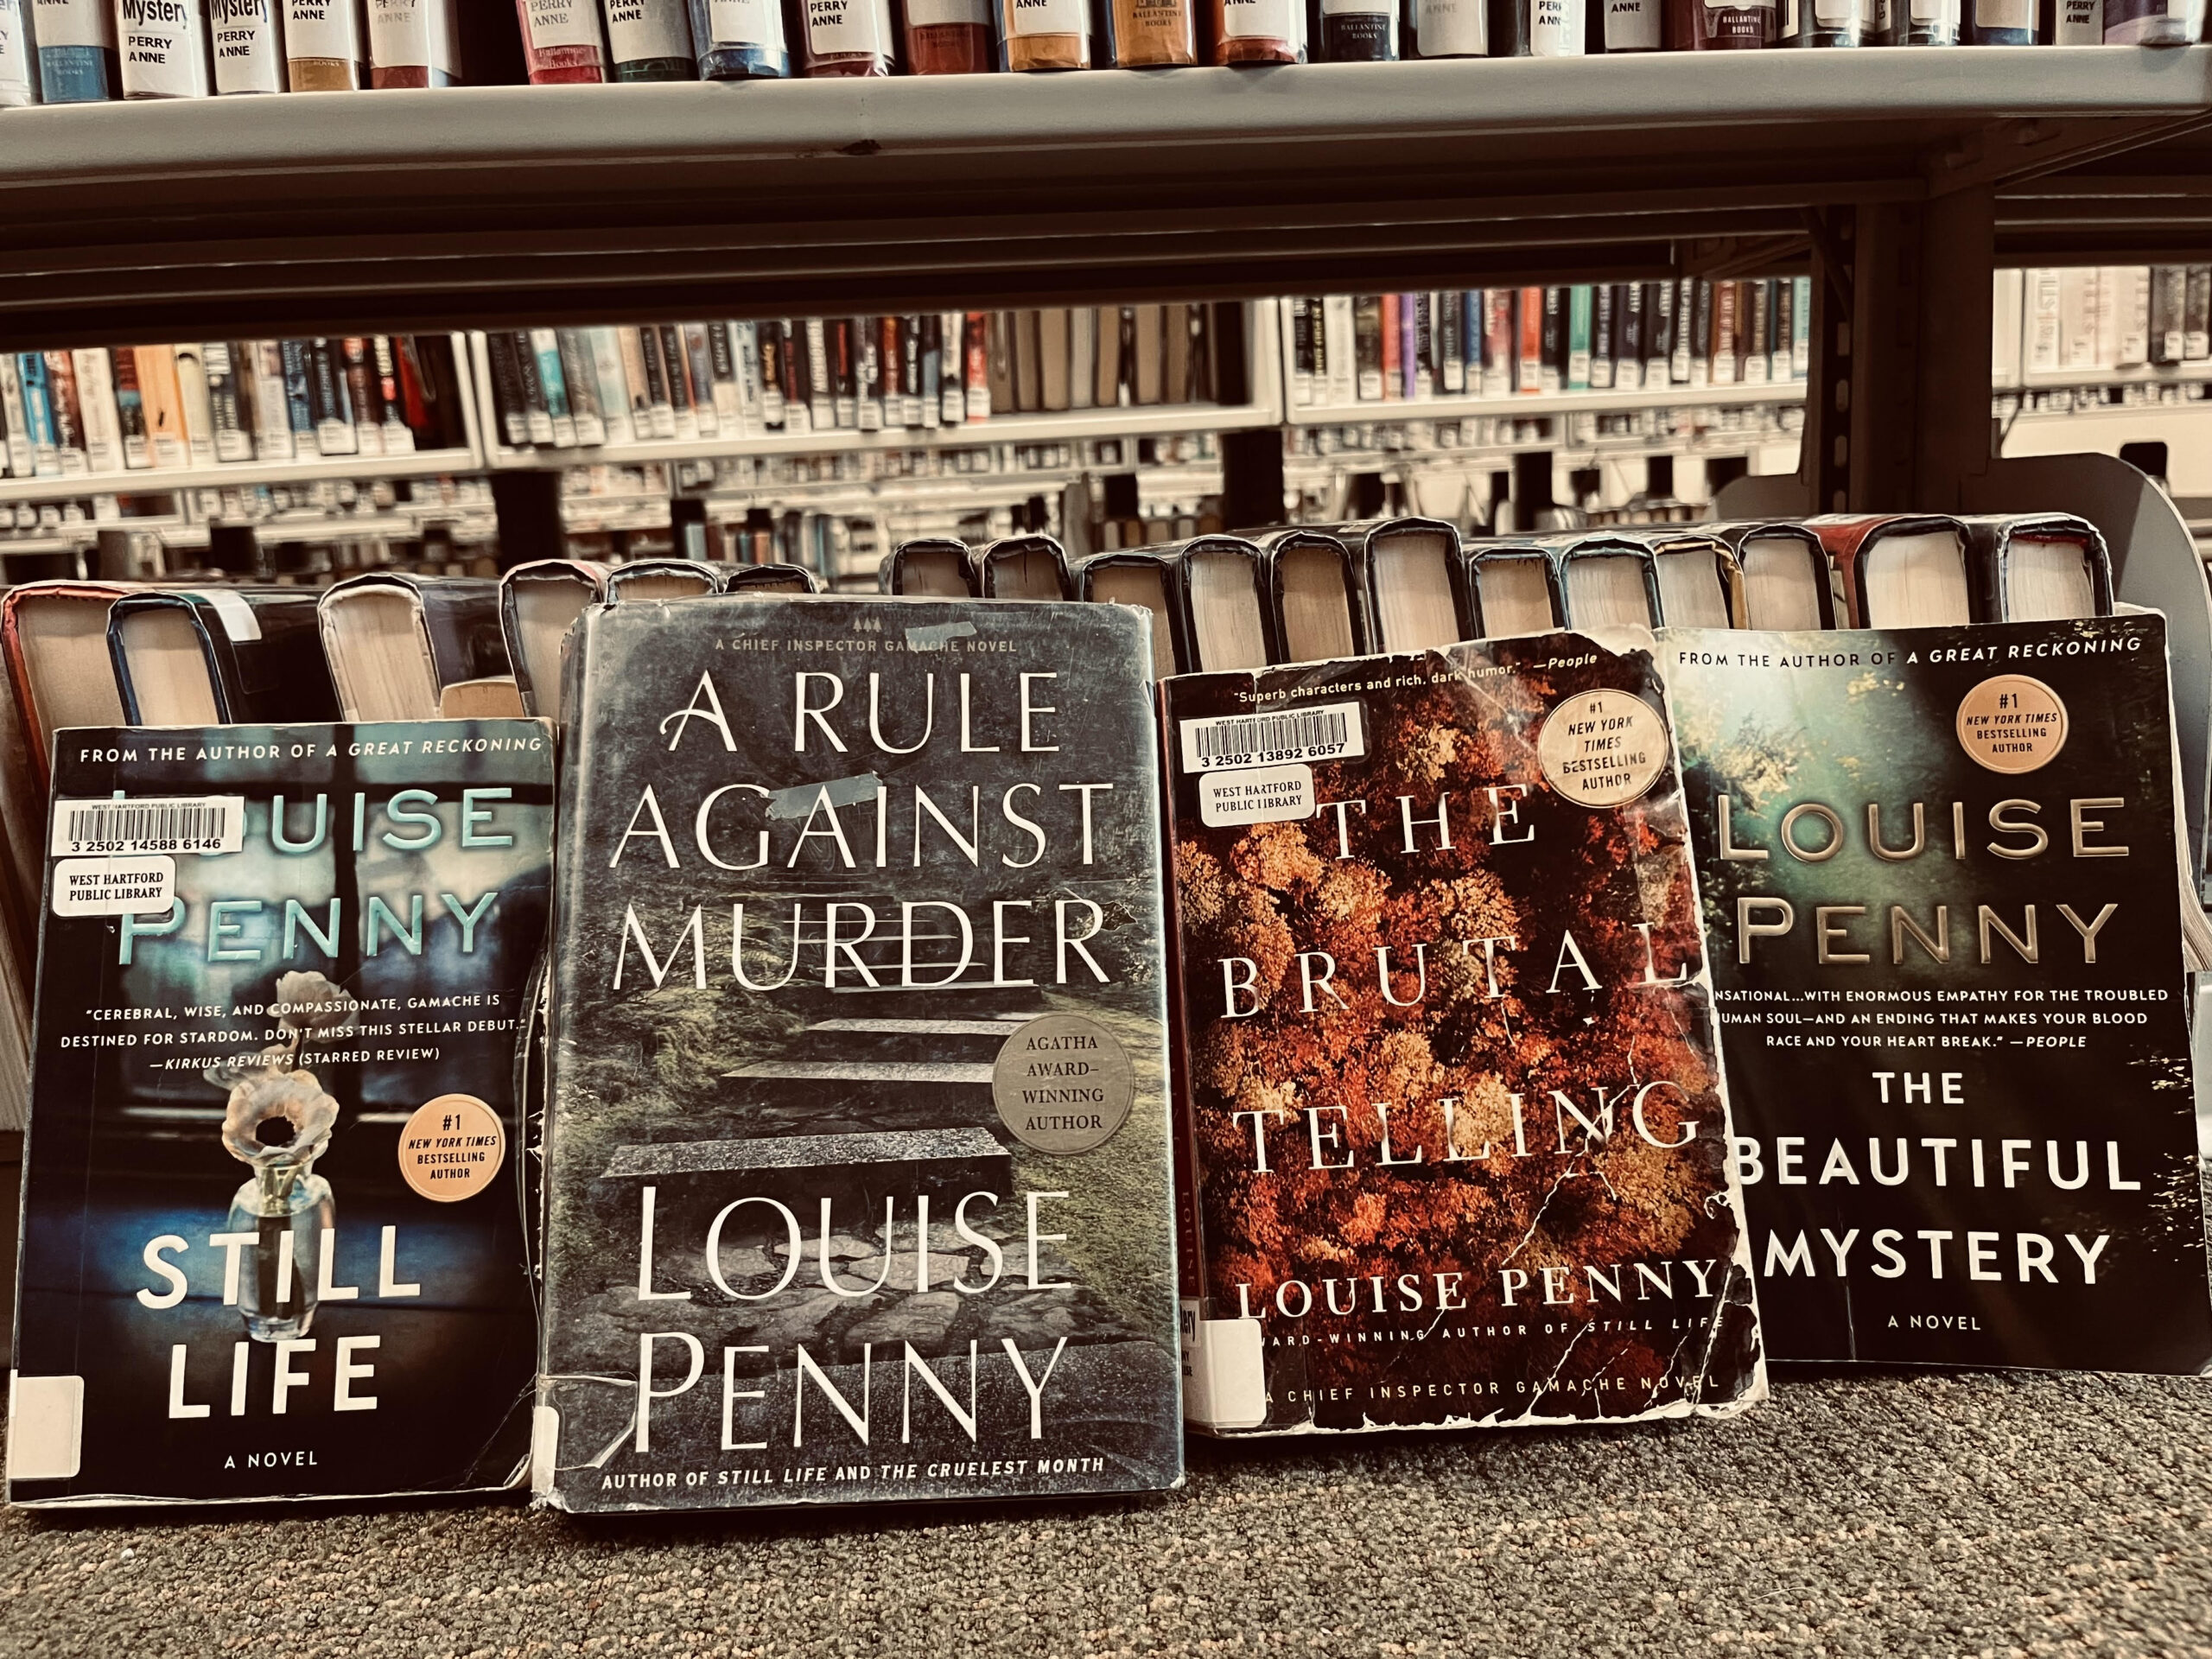 The Chief Inspector Ganache Mystery Series by Louise Penny